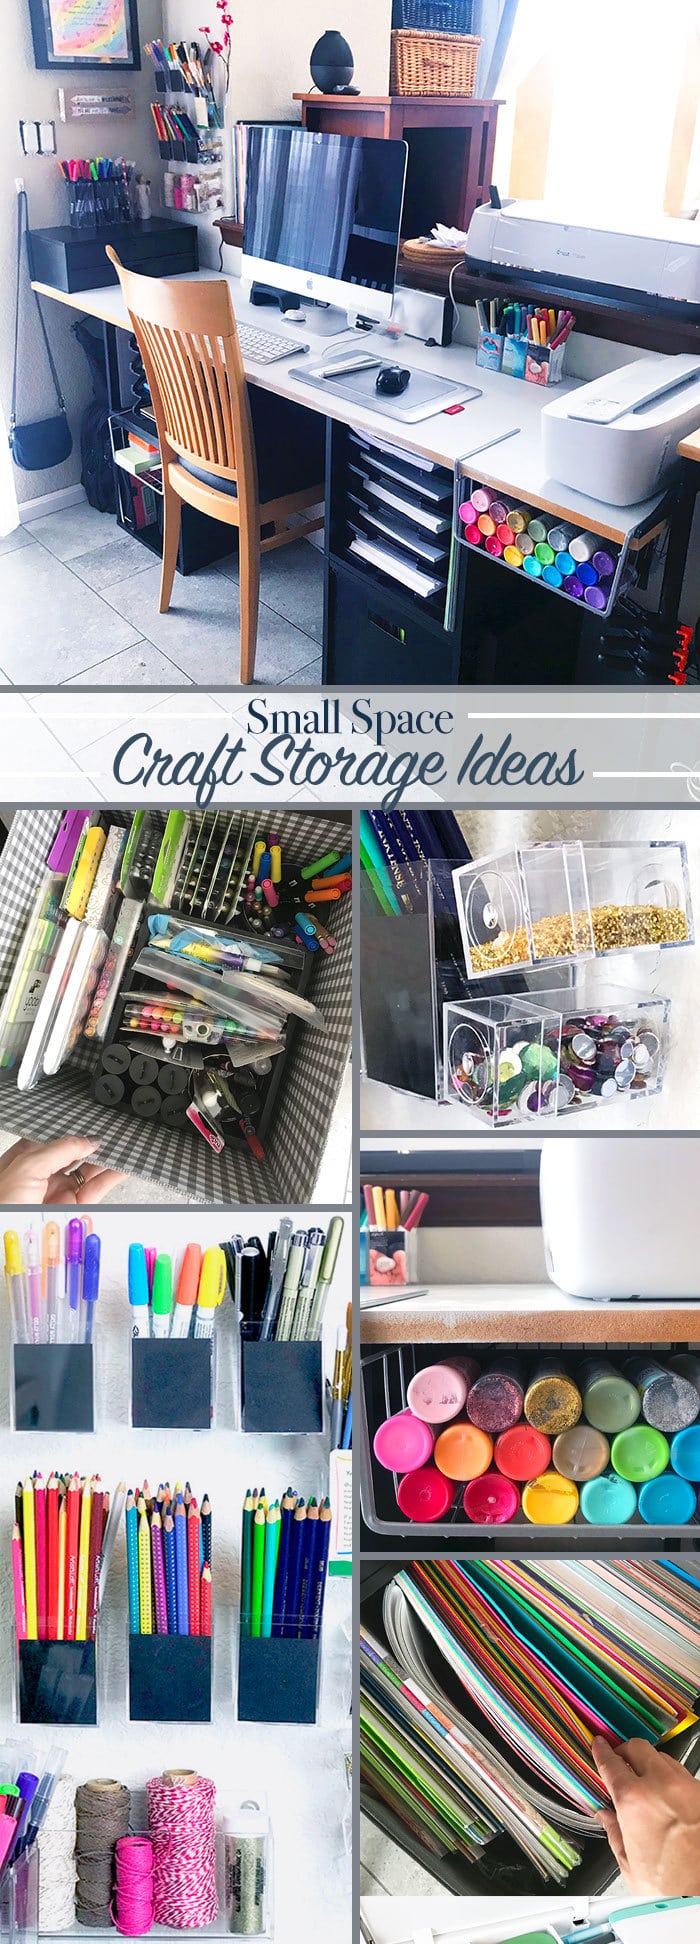 https://www.100directions.com/wp-content/uploads/2018/02/small-space-craft-room-storage-ideas-pin-jen-goode.jpg